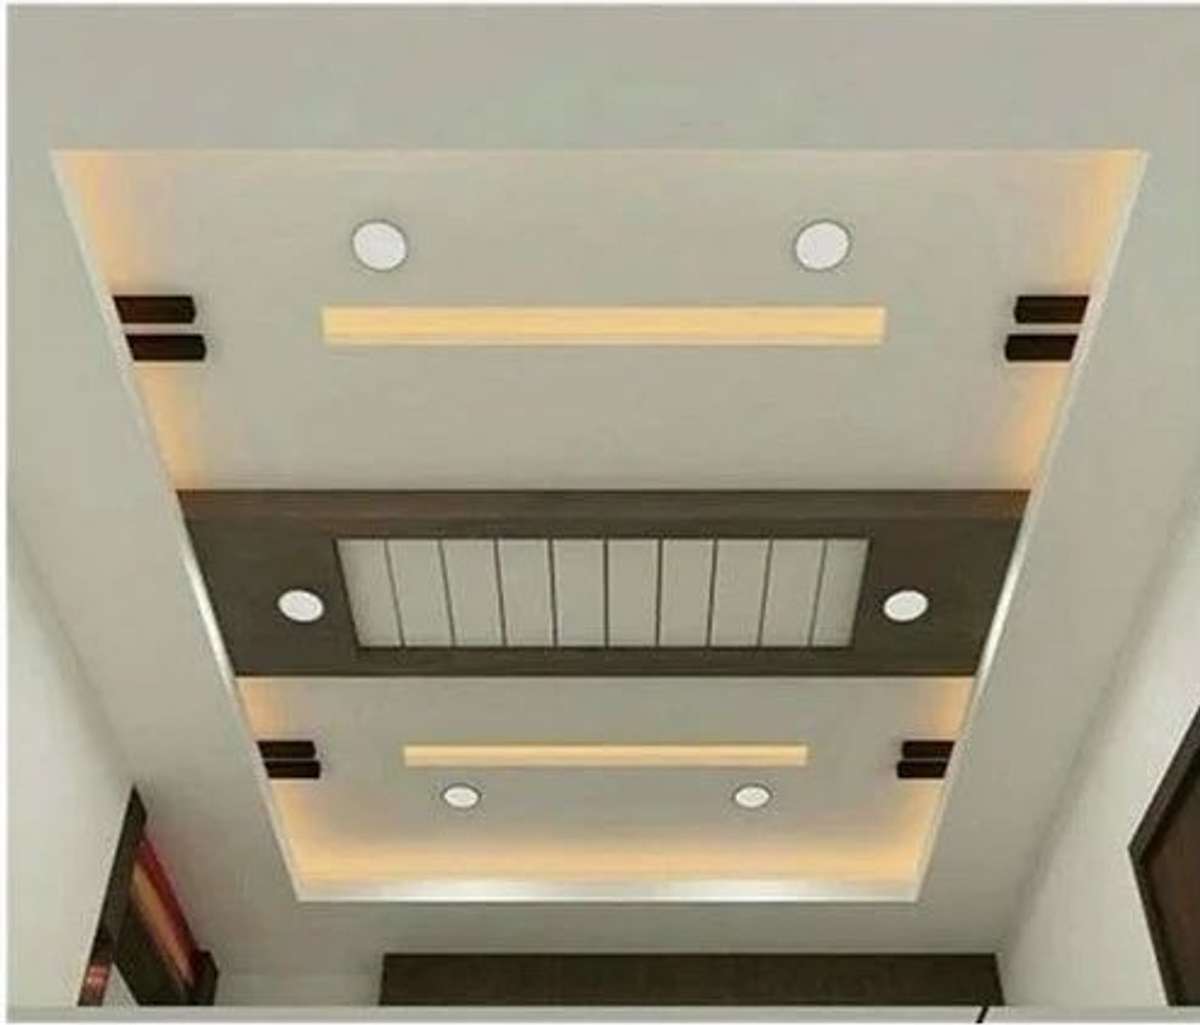 Ceiling, Lighting Designs by Architect Geetey And Sons Pvt Ltd, Jaipur | Kolo